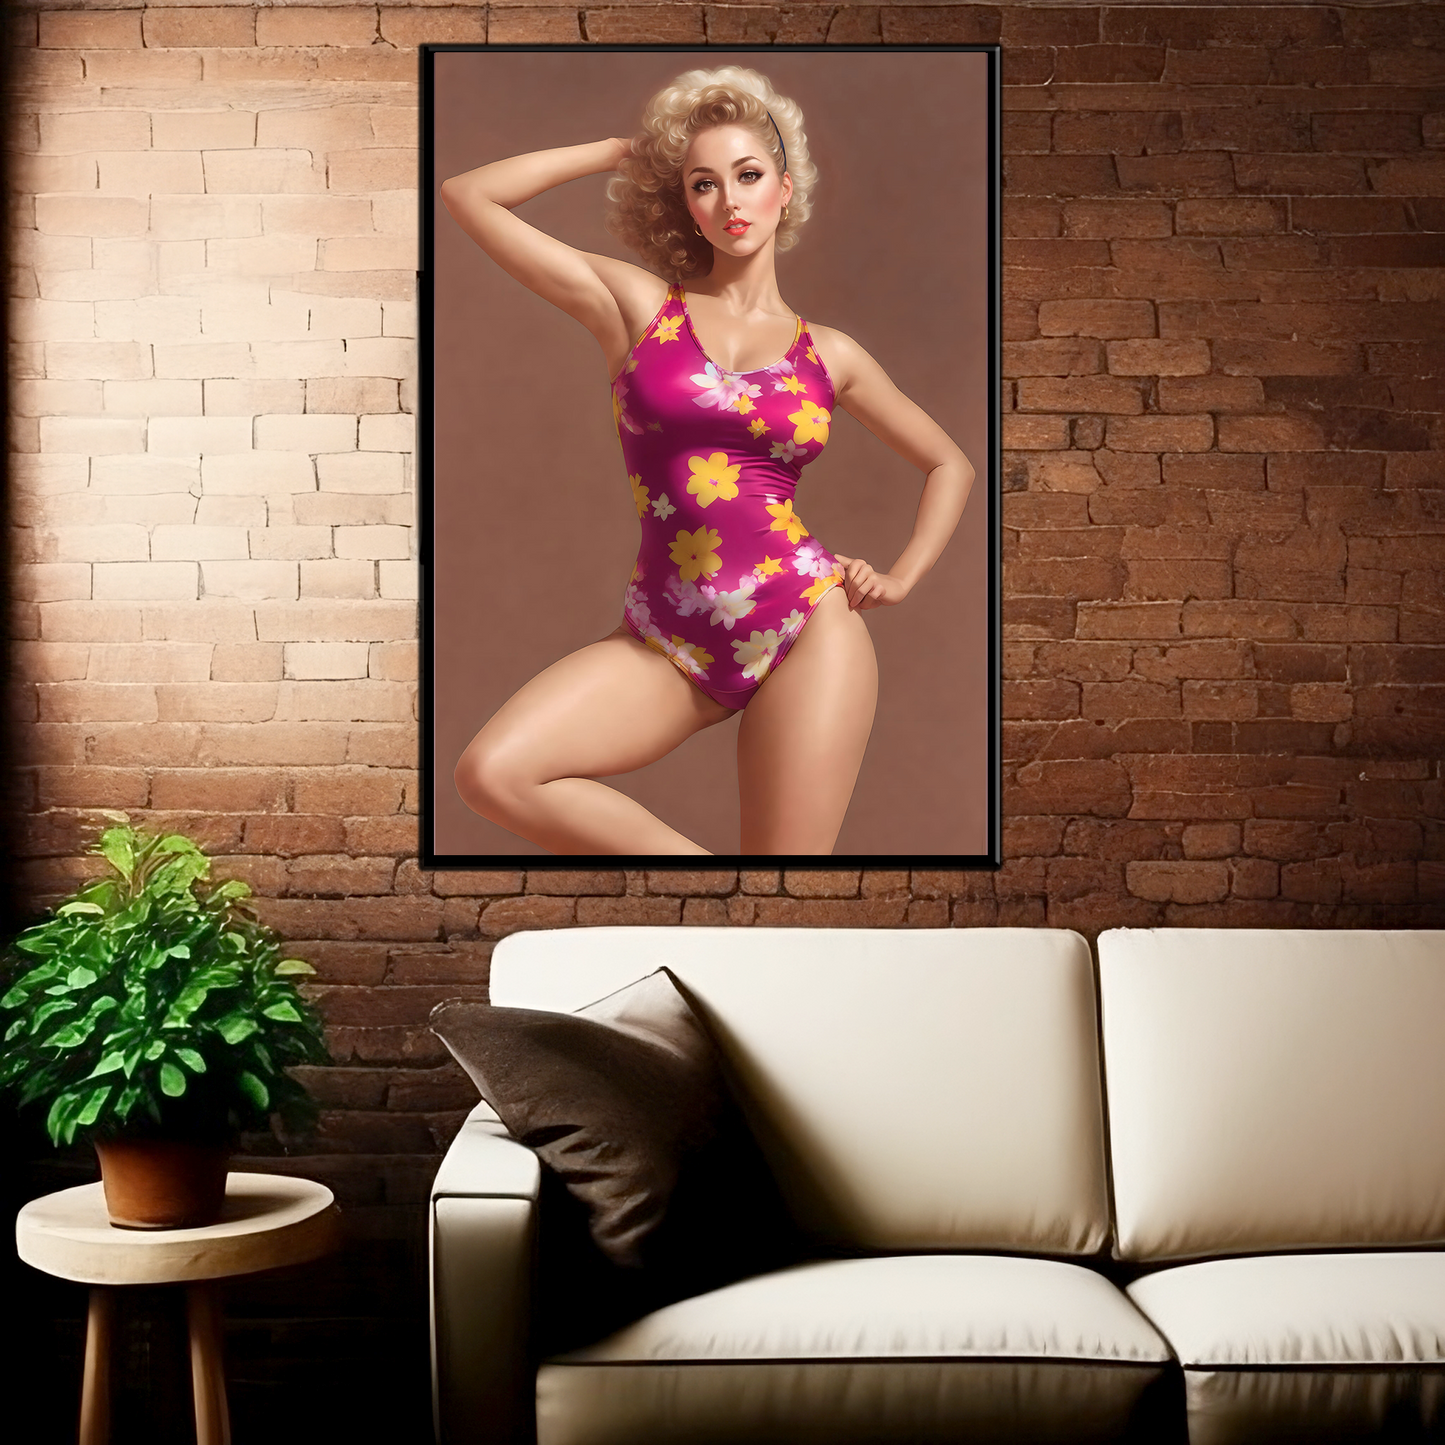 Daily Pinup #42 - Jazzercise Wall Art